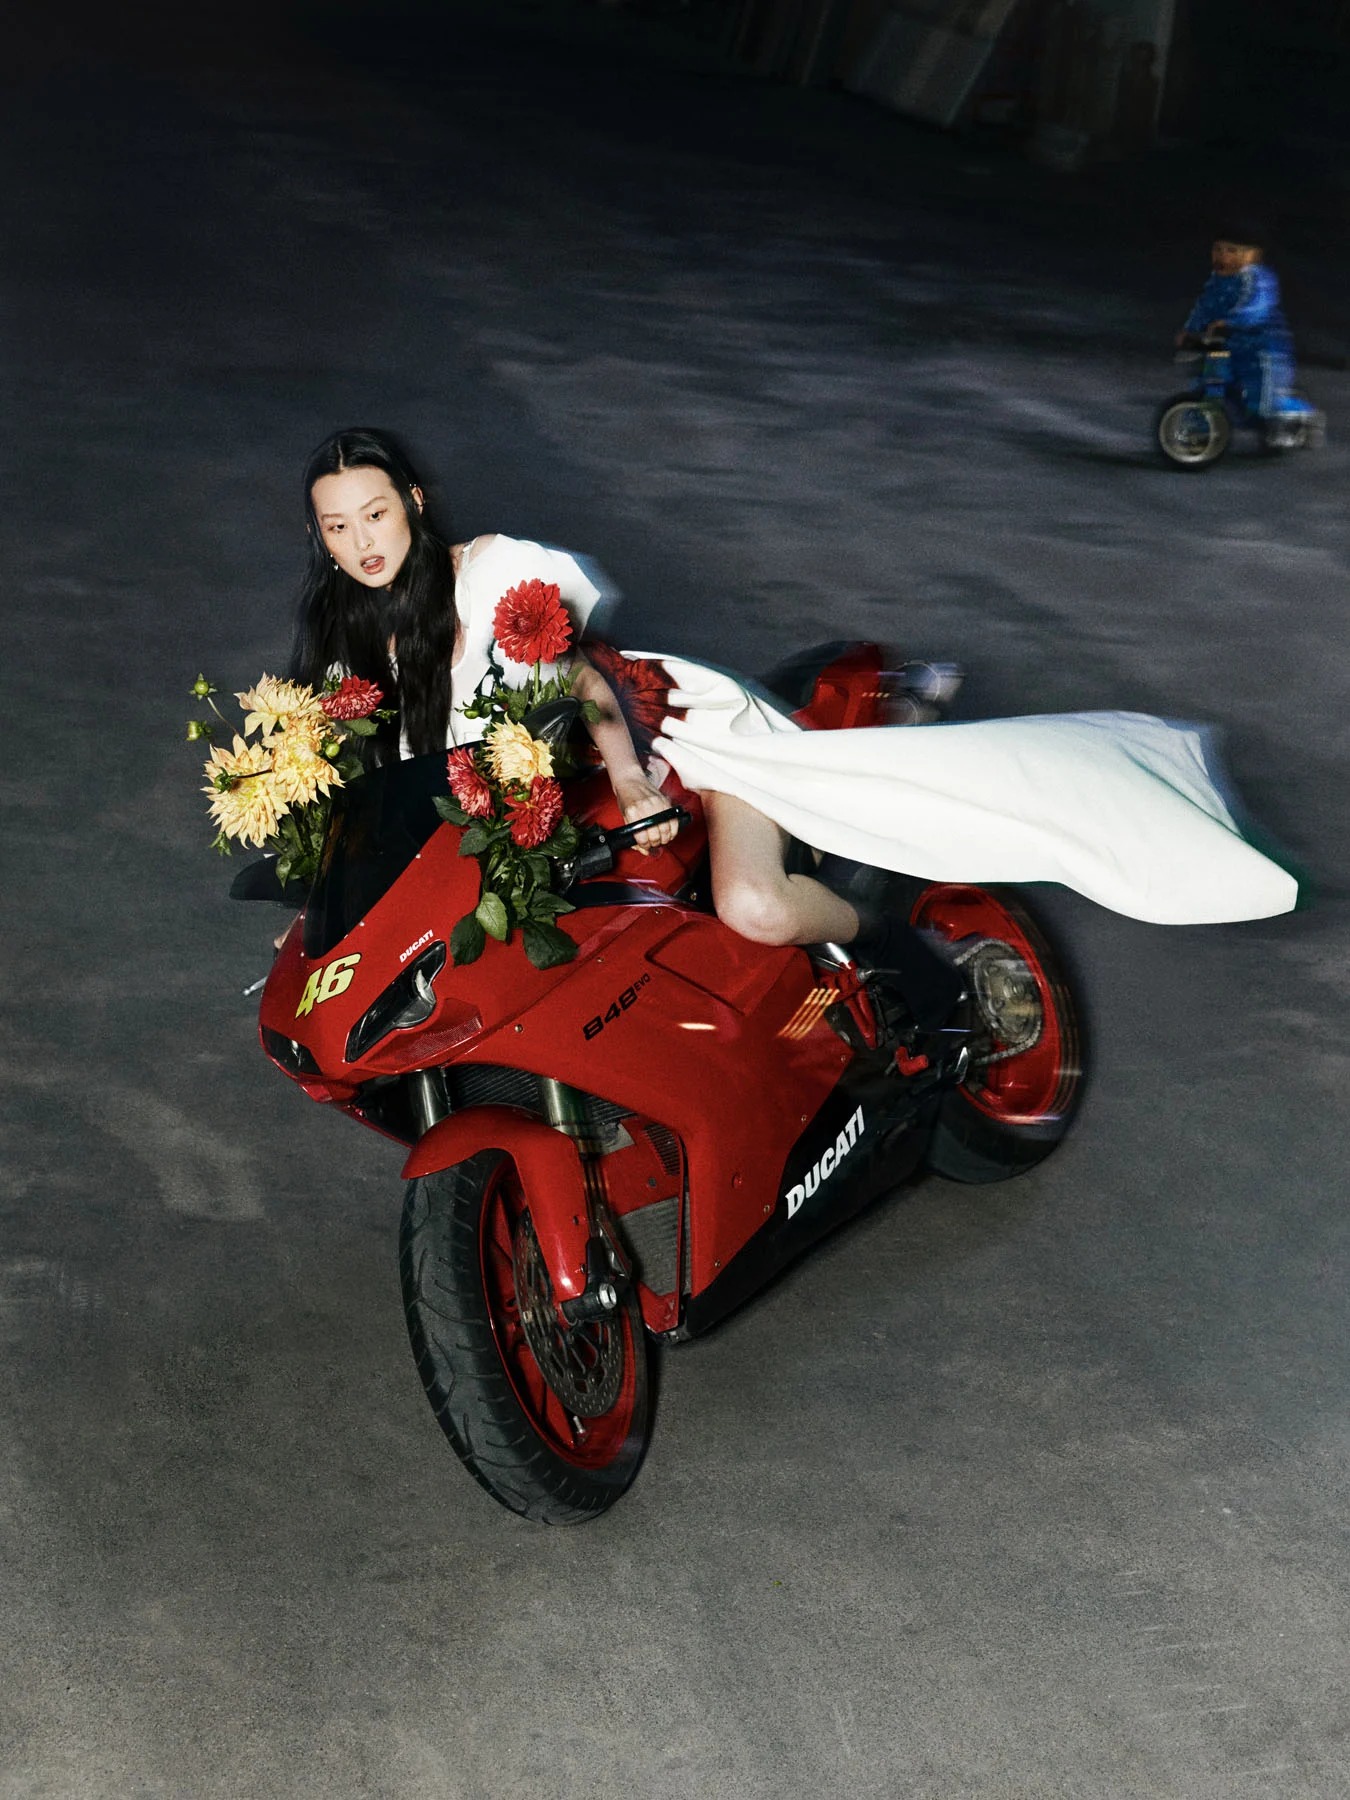 A photograph of model GuyuTong dressed in a white bridal dress as she rides a red motorcycle through a quaint alleyway.